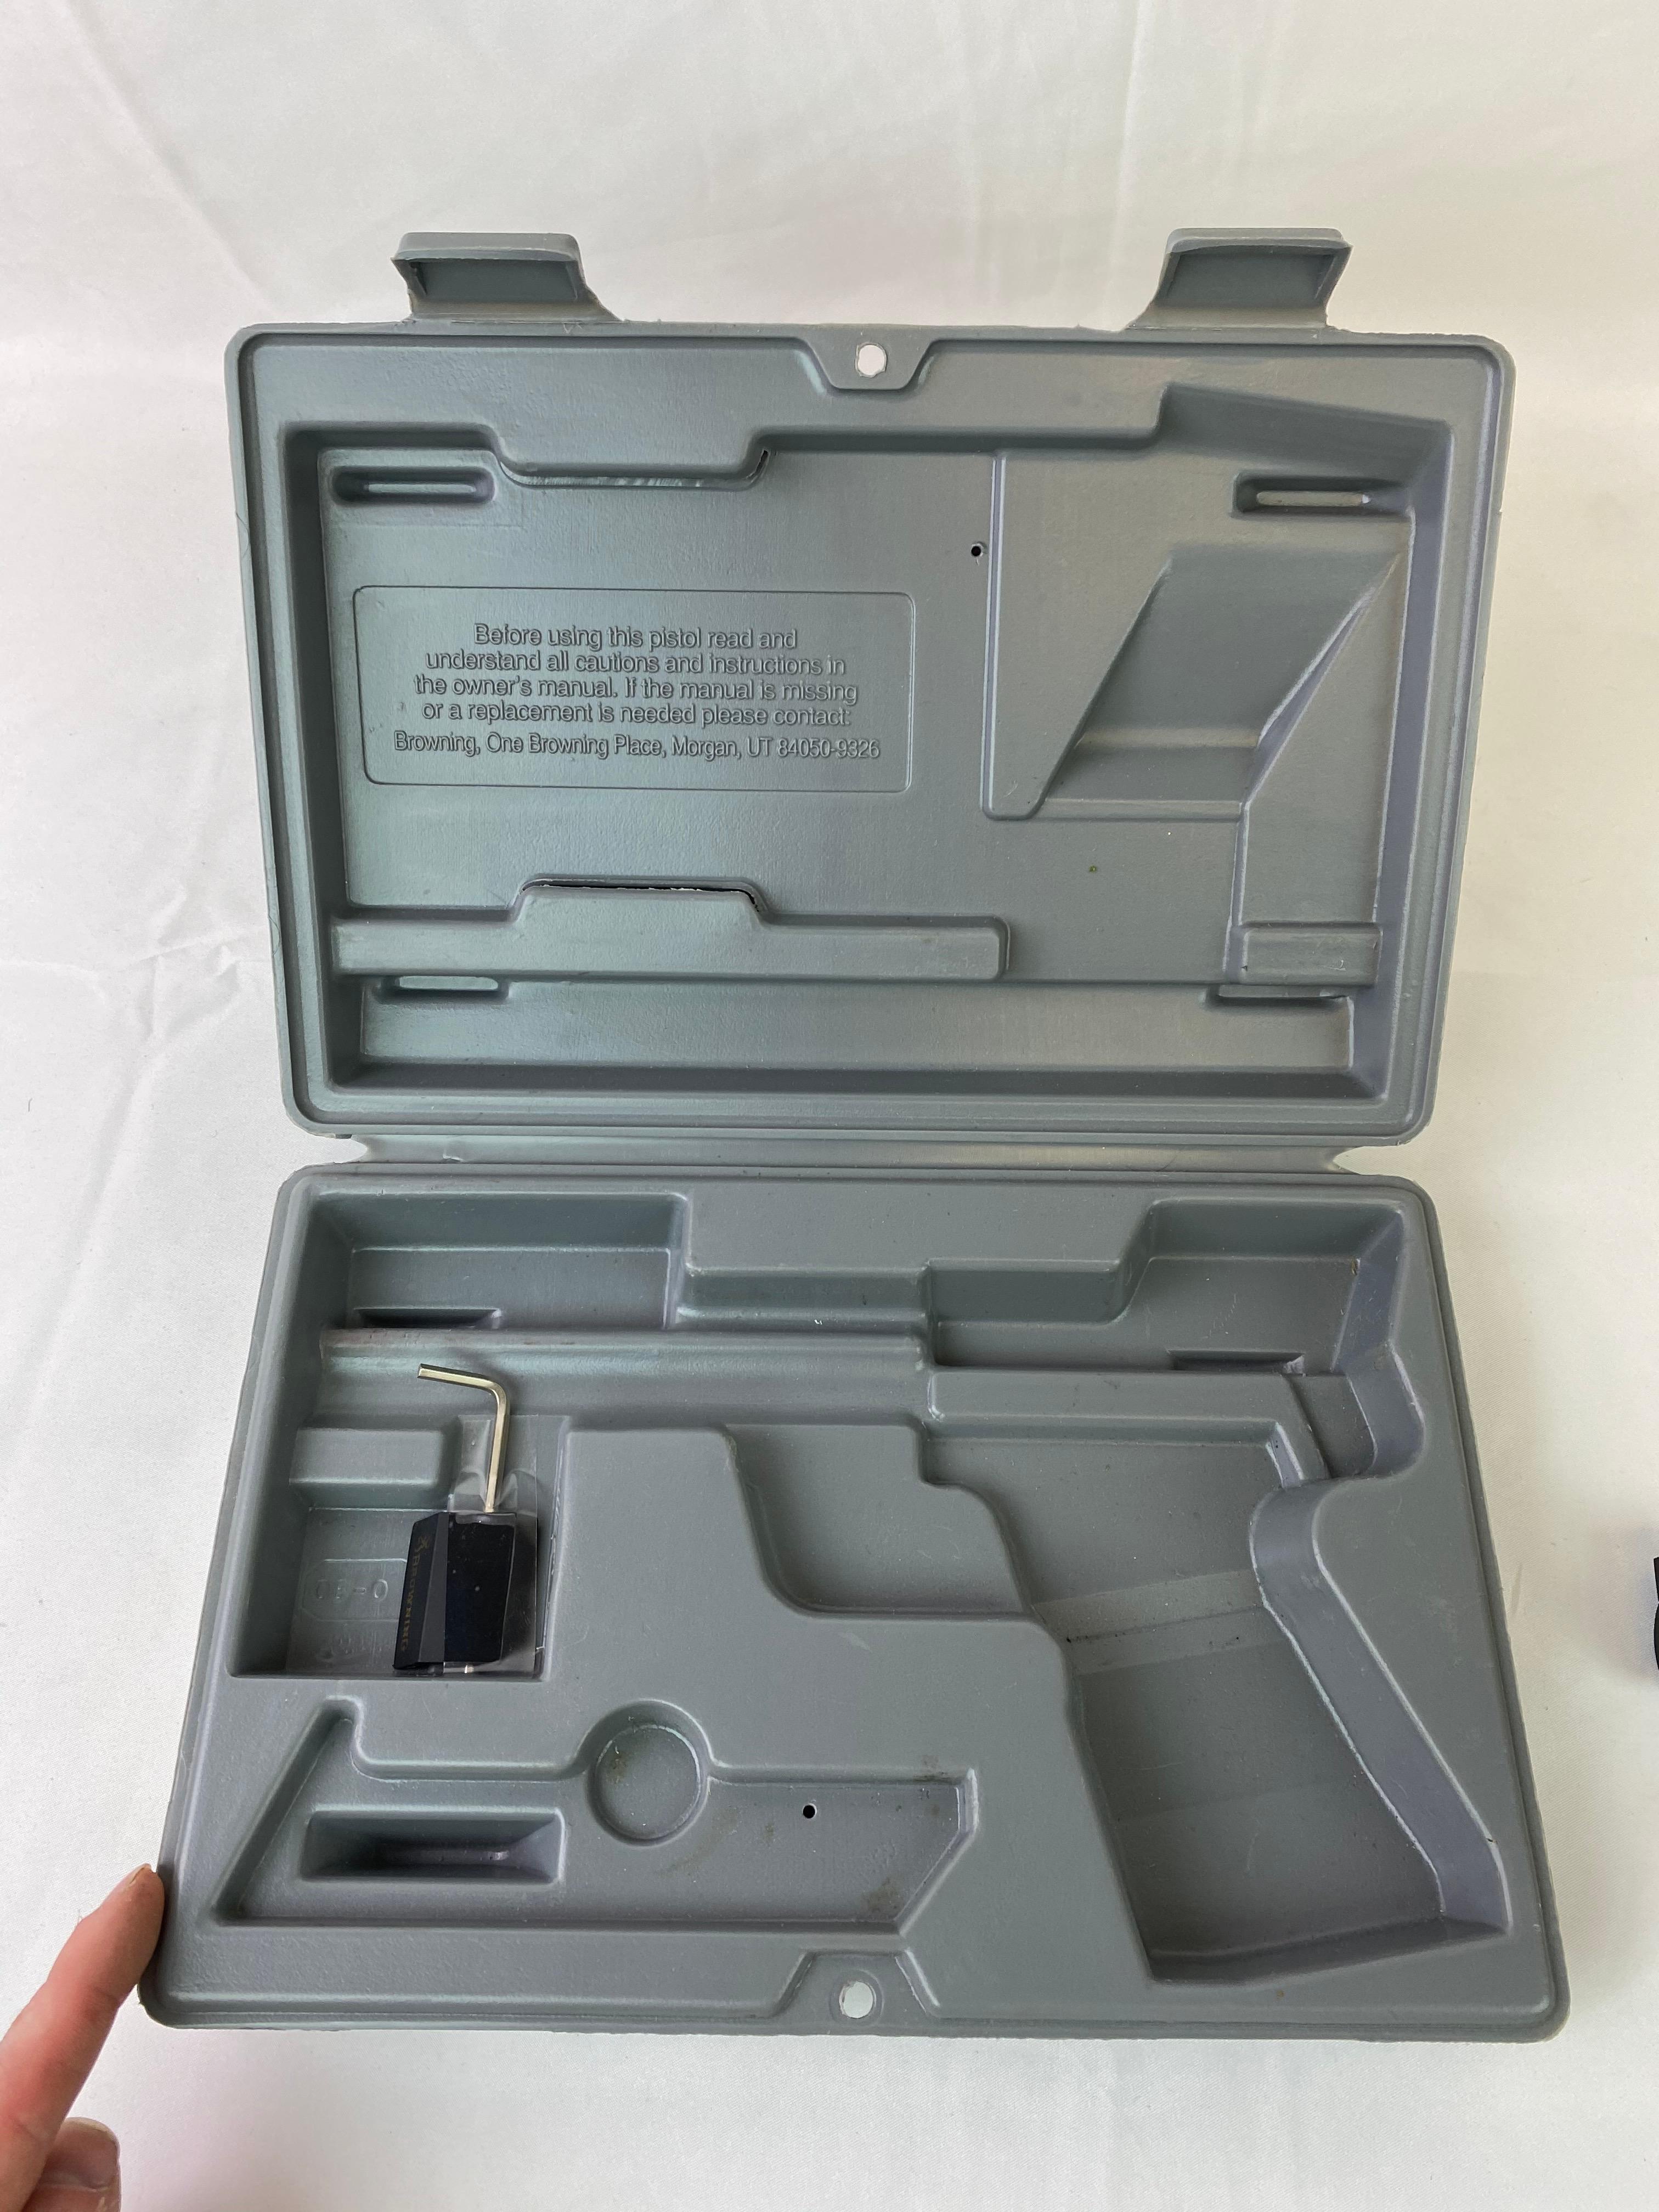 Browning Buck Mark .22LR 5.5 Target SE Semi-Automatic Pistol with Holographic Sight in Box